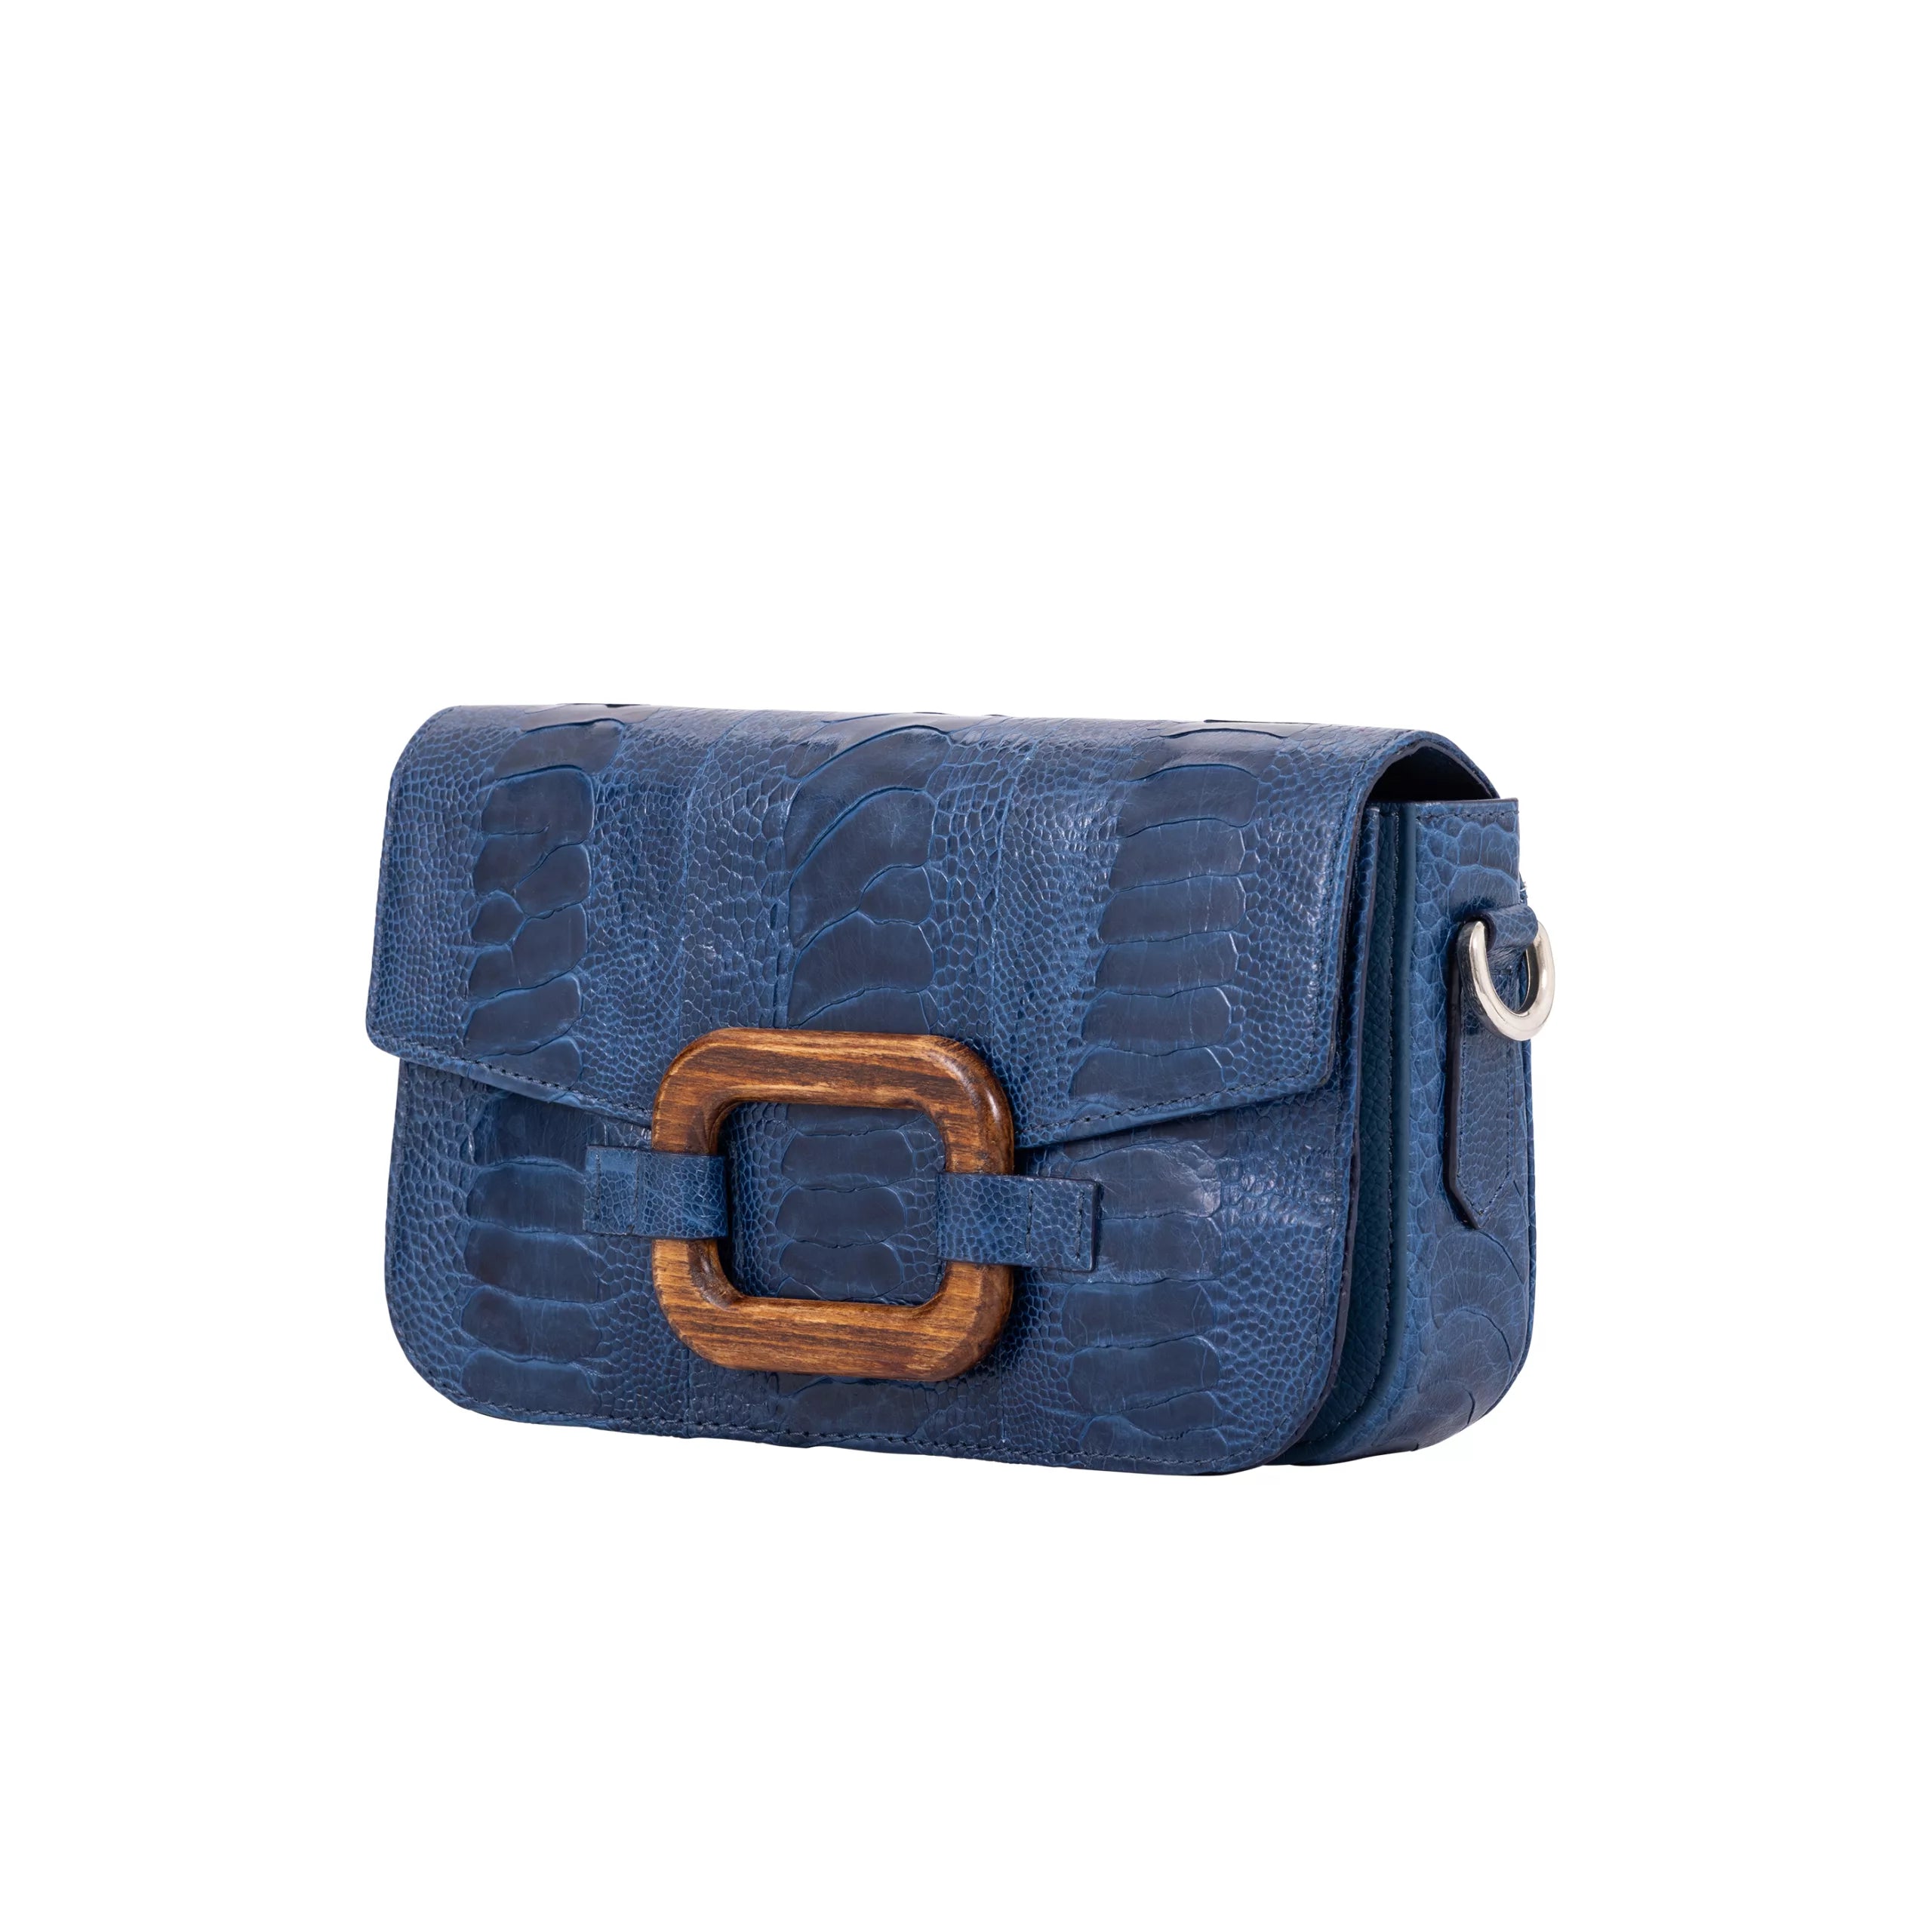 Deya Crossbody in Teal Ostrich Leg with a Wood Ring Detail by Cape Cobra